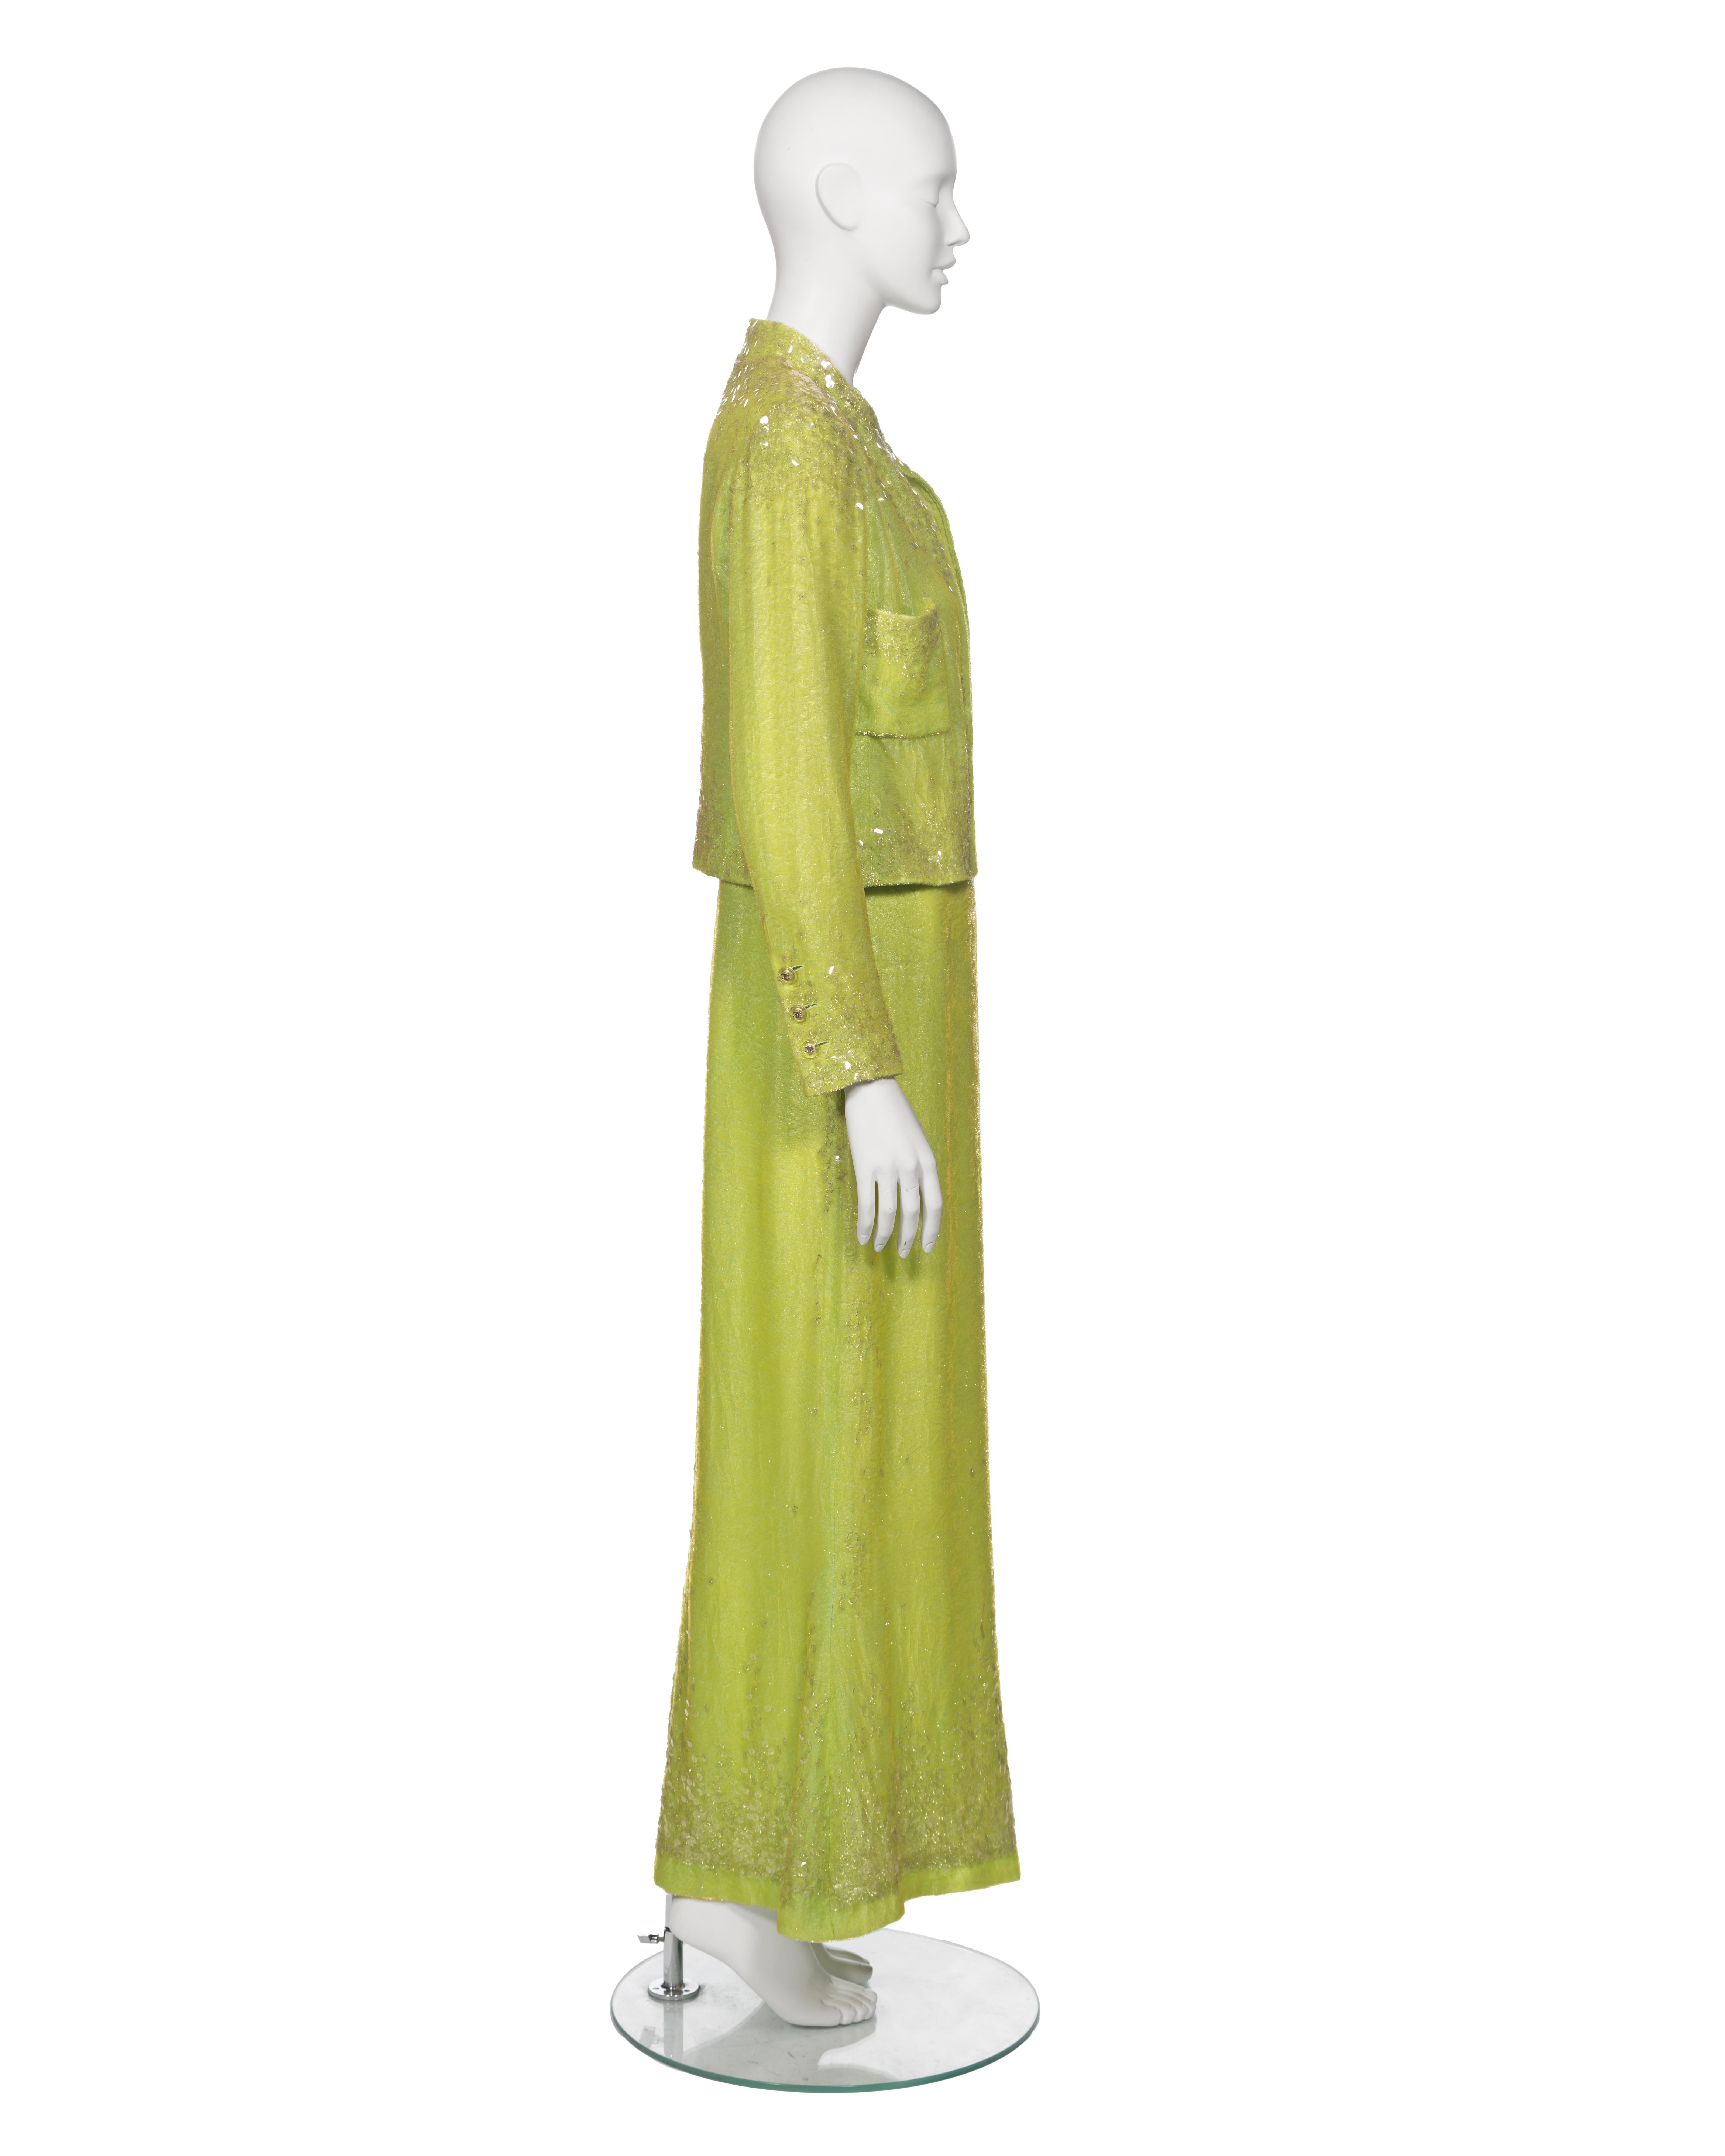 Chanel by Karl Lagerfeld Embellished Lime Green Velvet Dress and Jacket, ss 1997 For Sale 8